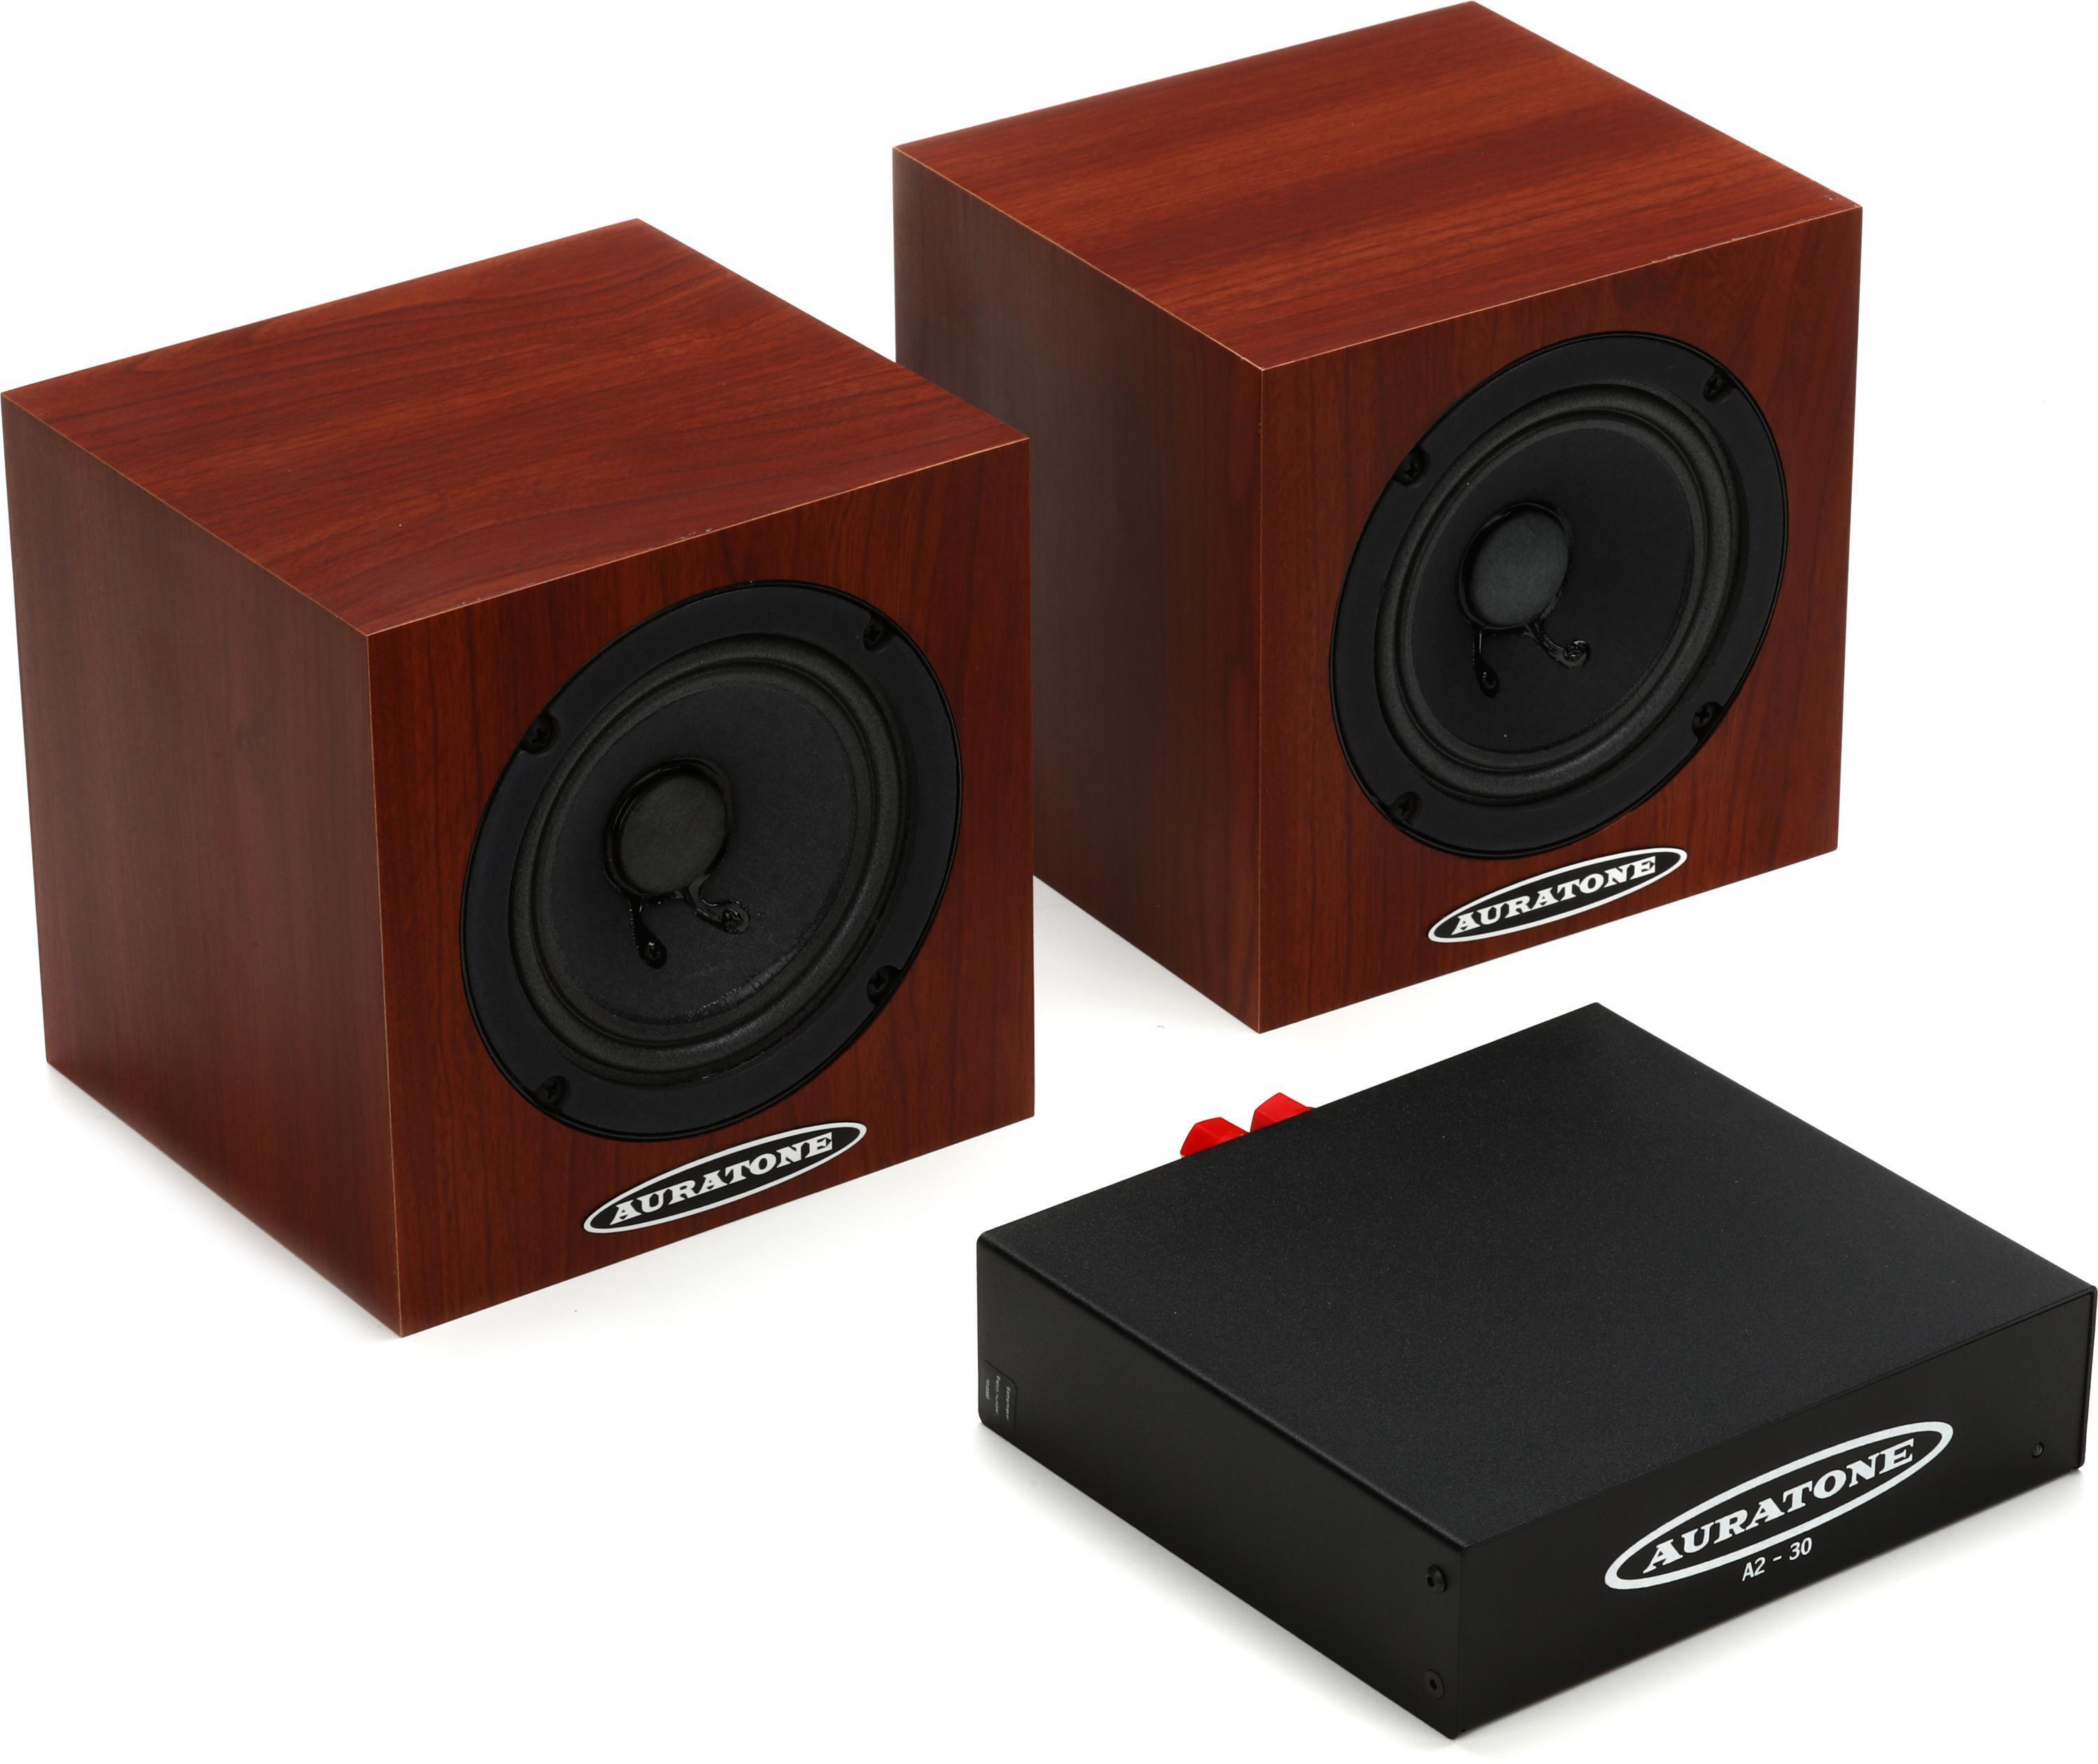 Auratone 5C Super Sound Cubes 4.5-inch Passive Reference Monitors with  A2-30 Power Amp - Mahogany